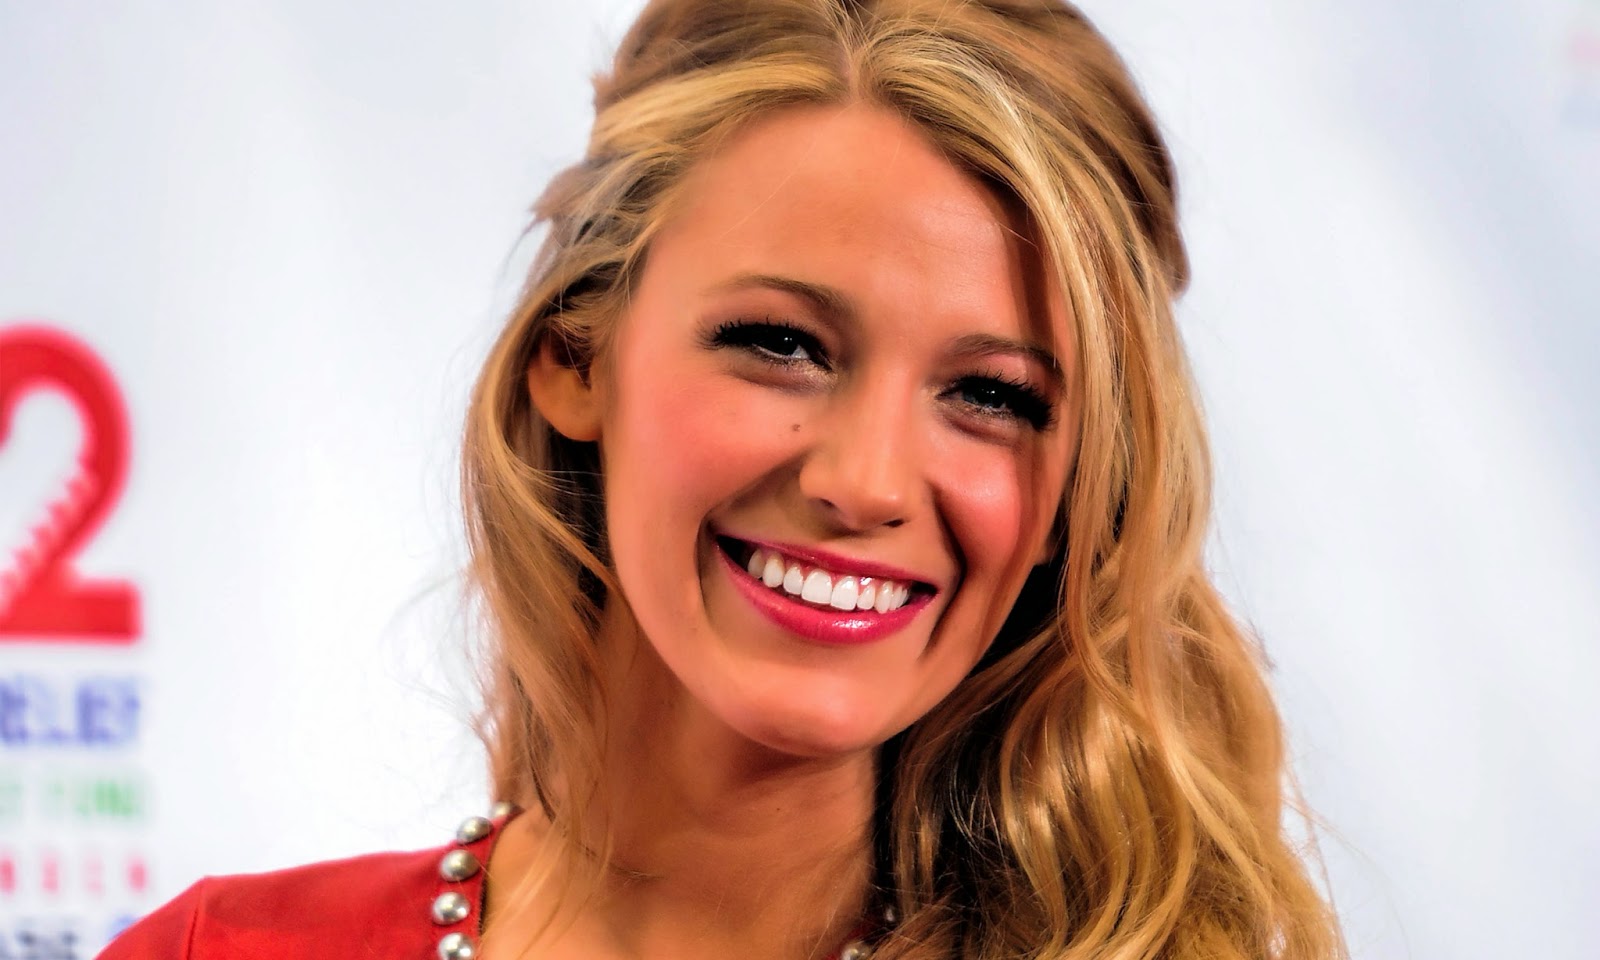 Amazing Blake Lively Smile Background Free Desktop Mobile HD Picture